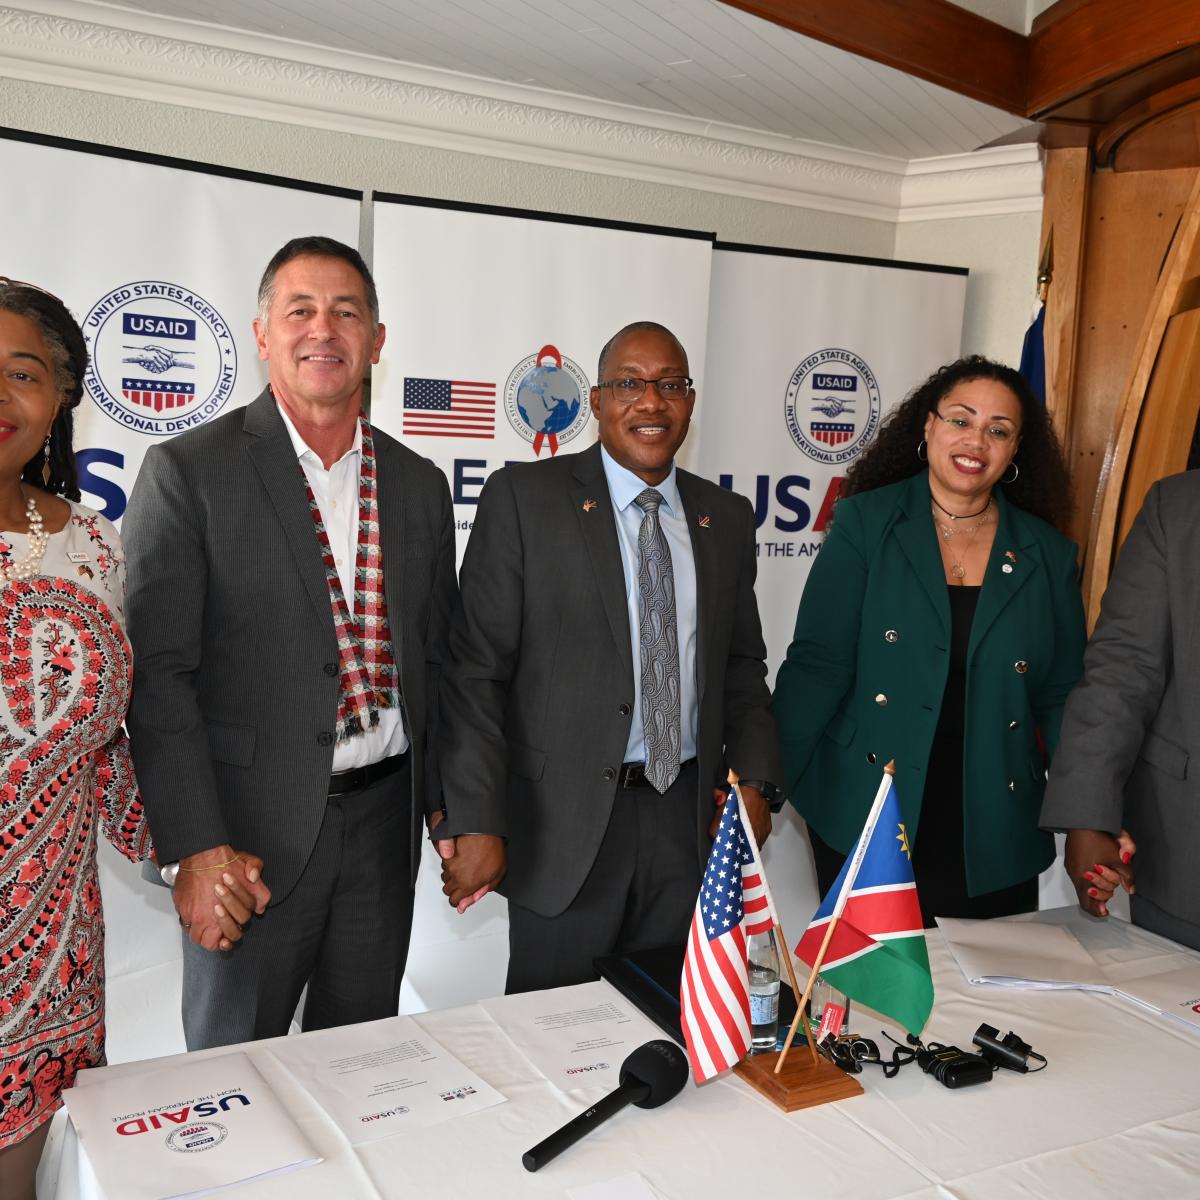 PEPFAR Invests N$840 Million in New USAID Program to Provide Health Services to Vulnerable Children and Youth